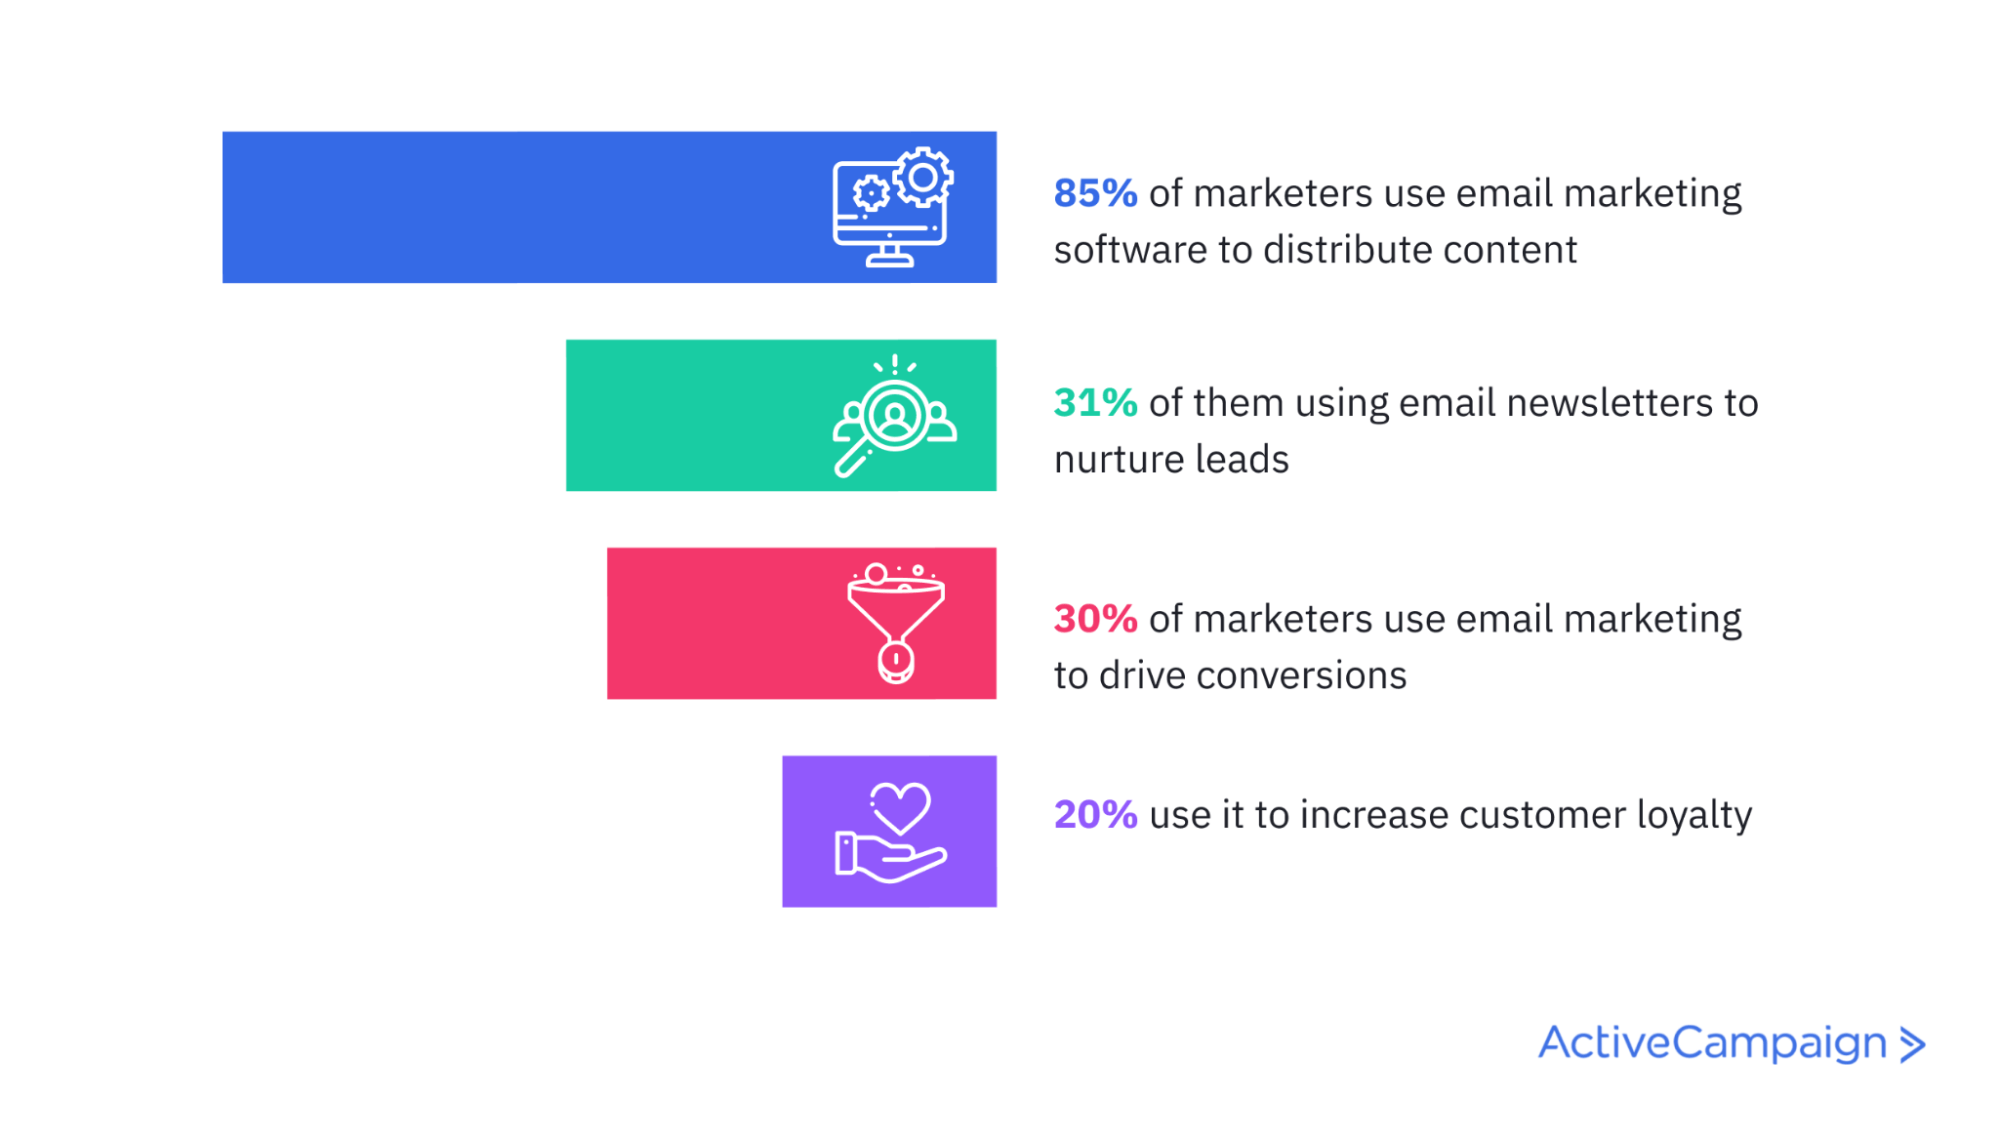 email statistics infographic stating 85% of marketers use email marketing software to distribute content